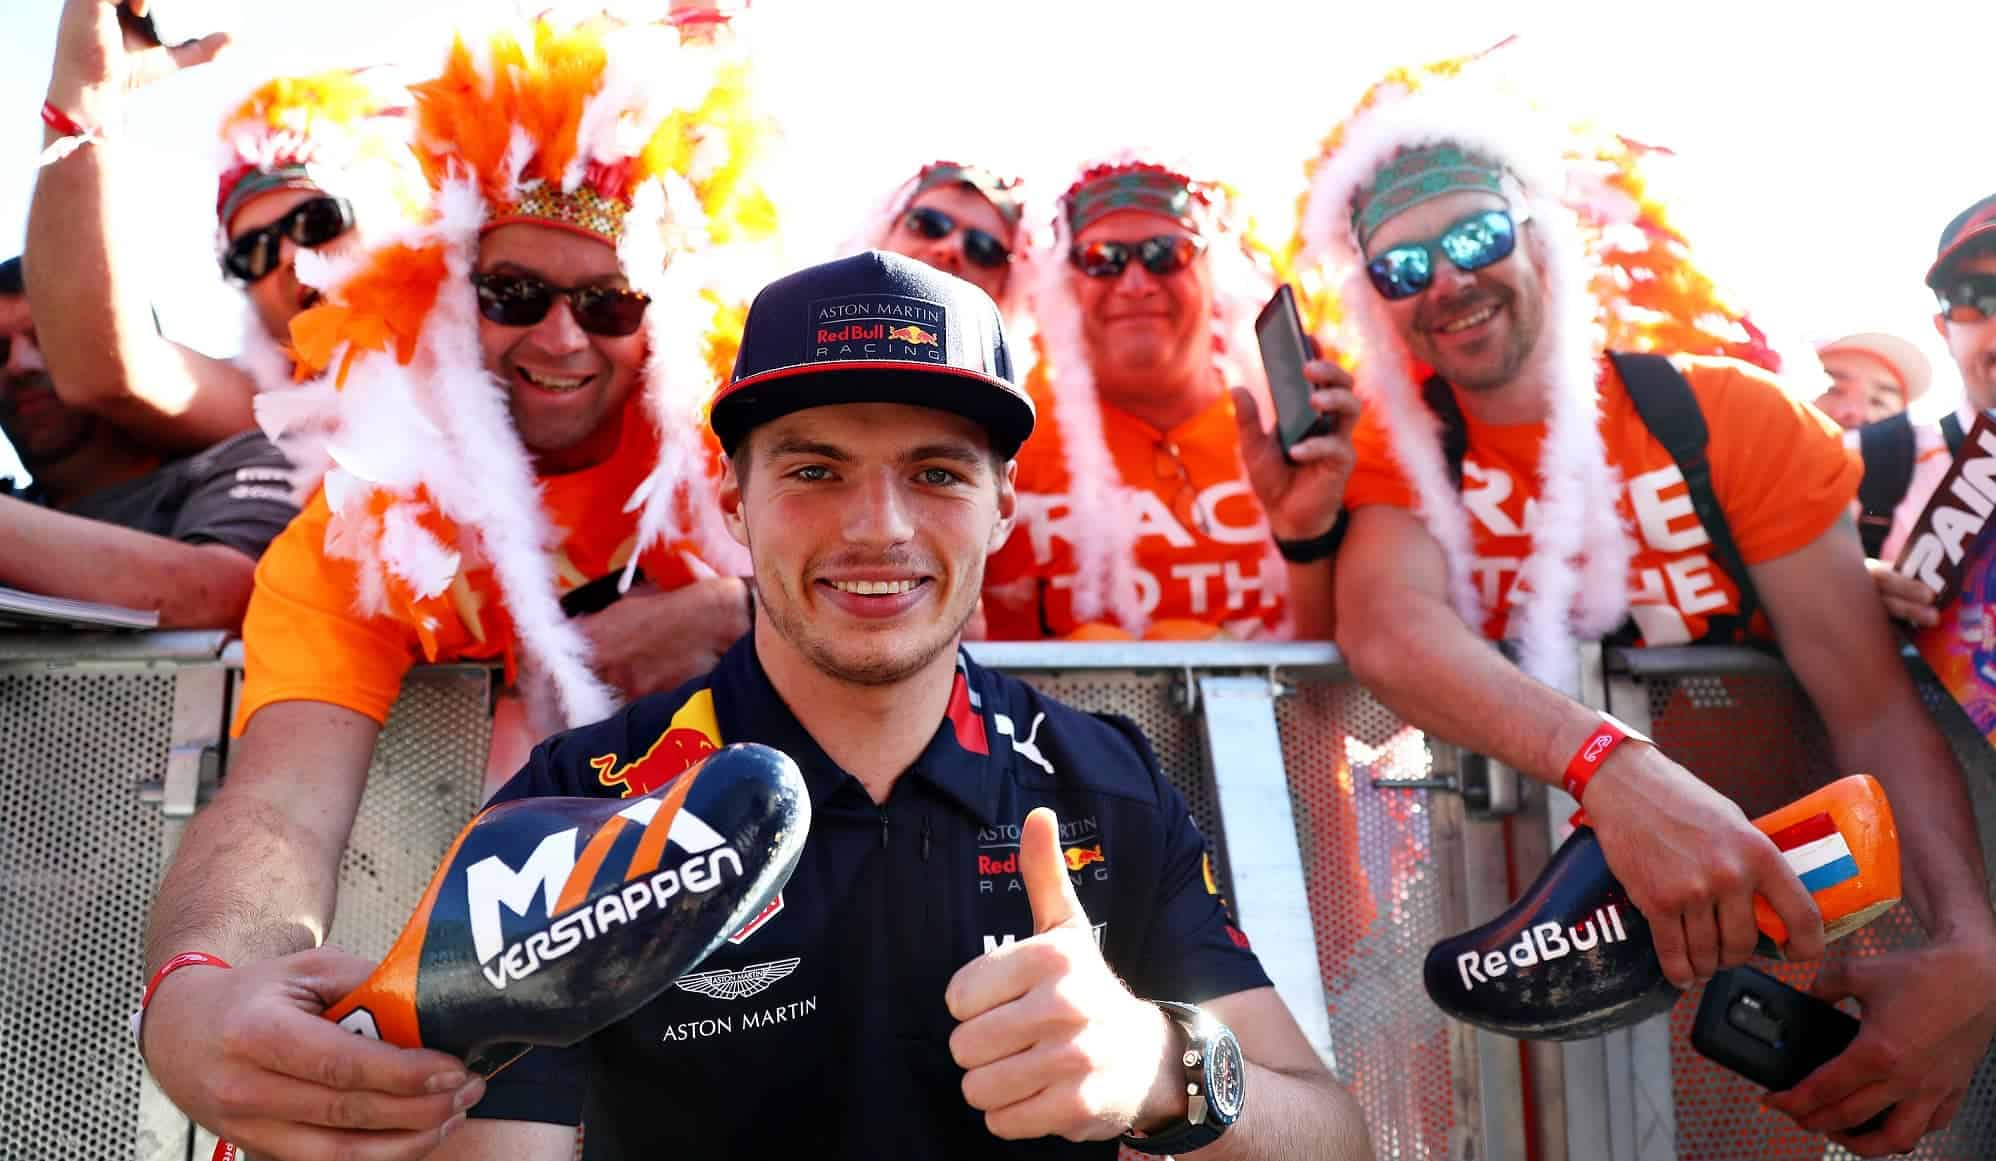 Max Verstappen posing infronf of the camera with fans behind him